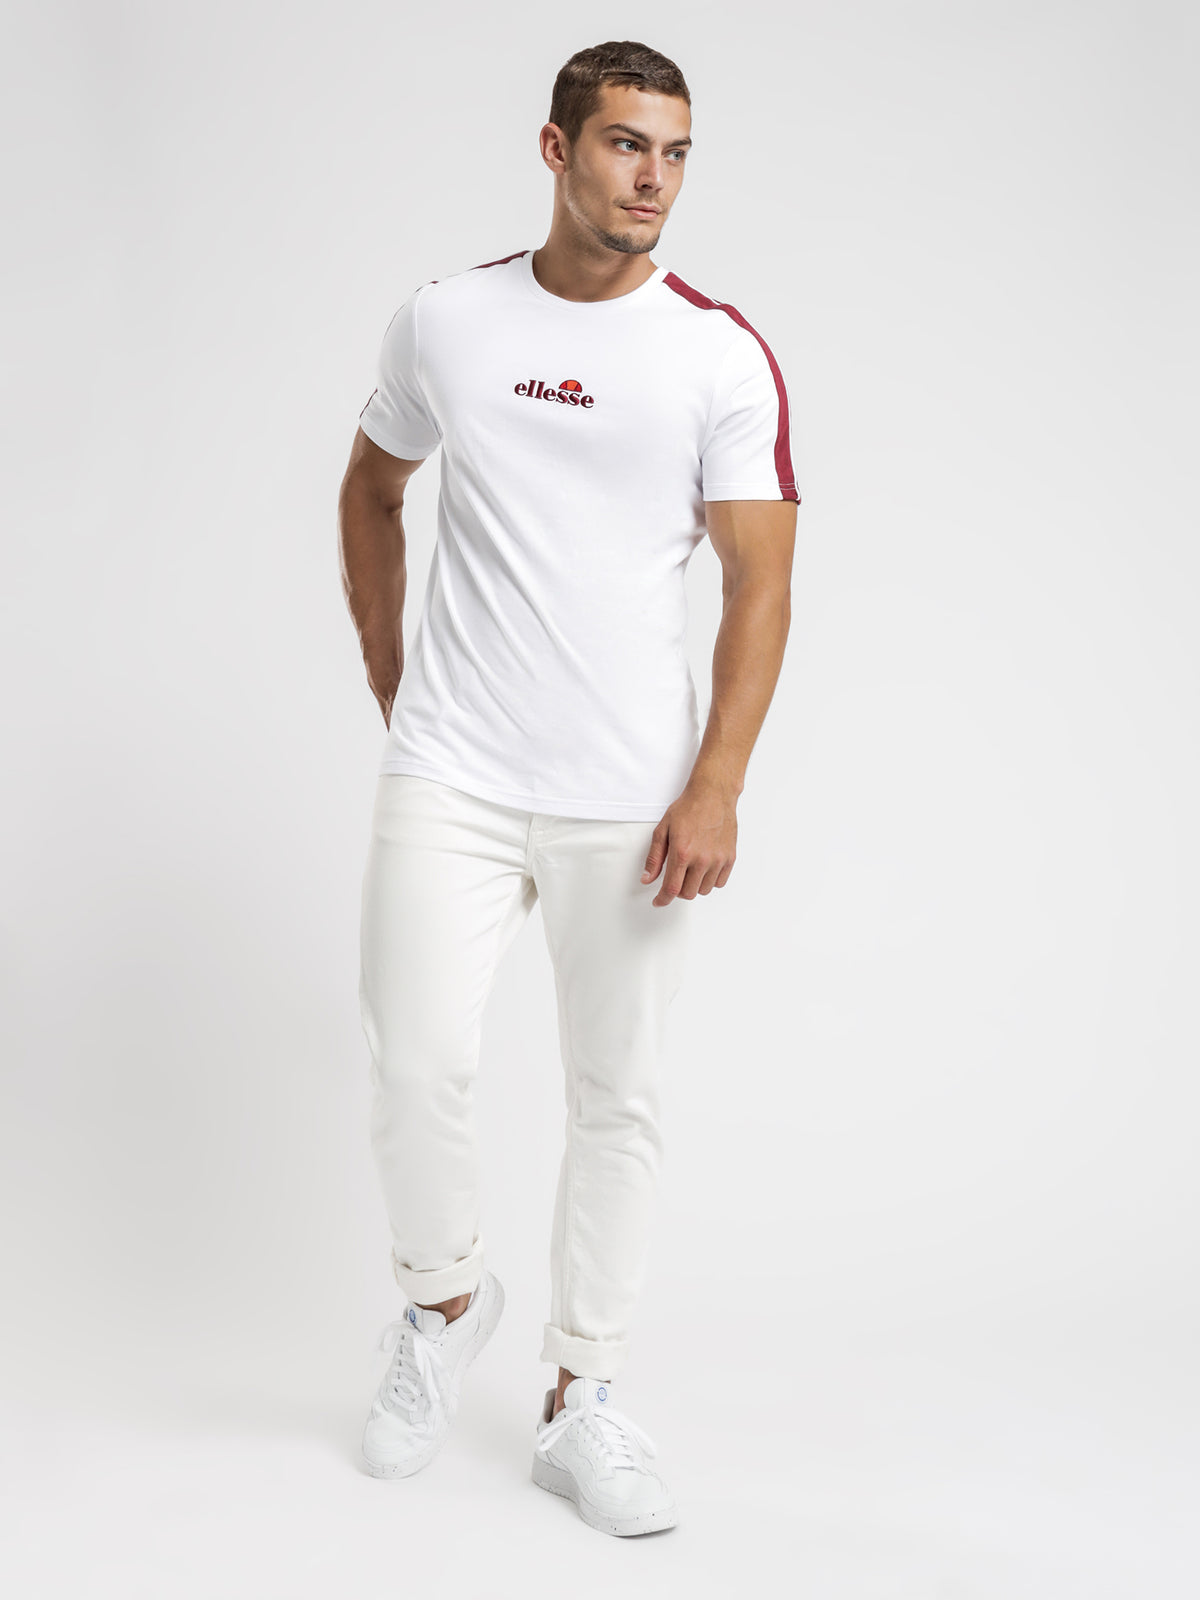 Carcano T-Shirt in White &amp; Red